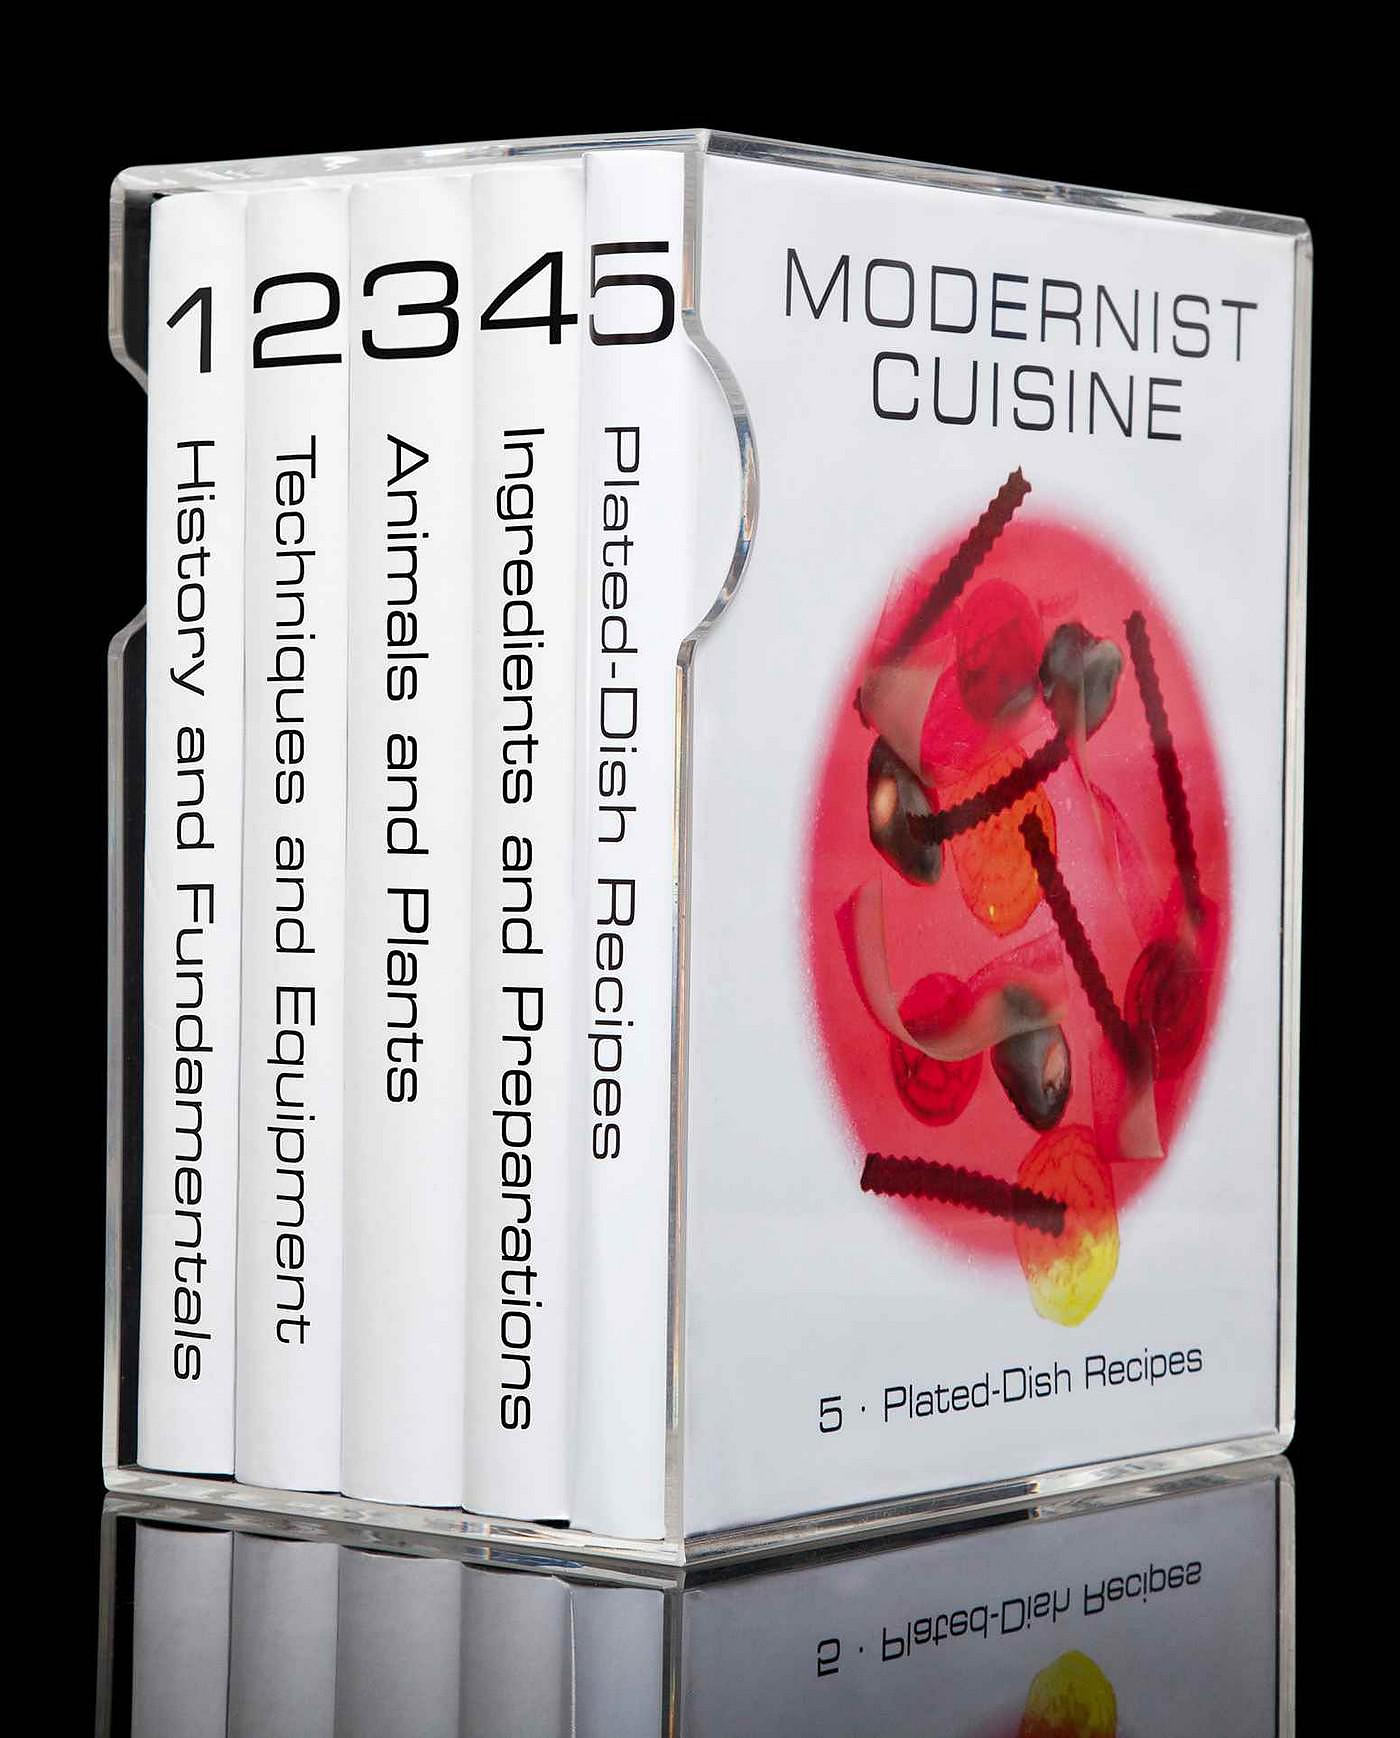 Modernist Cuisine: A Cookbook Illustrated with Ryan Smith’s Photography.